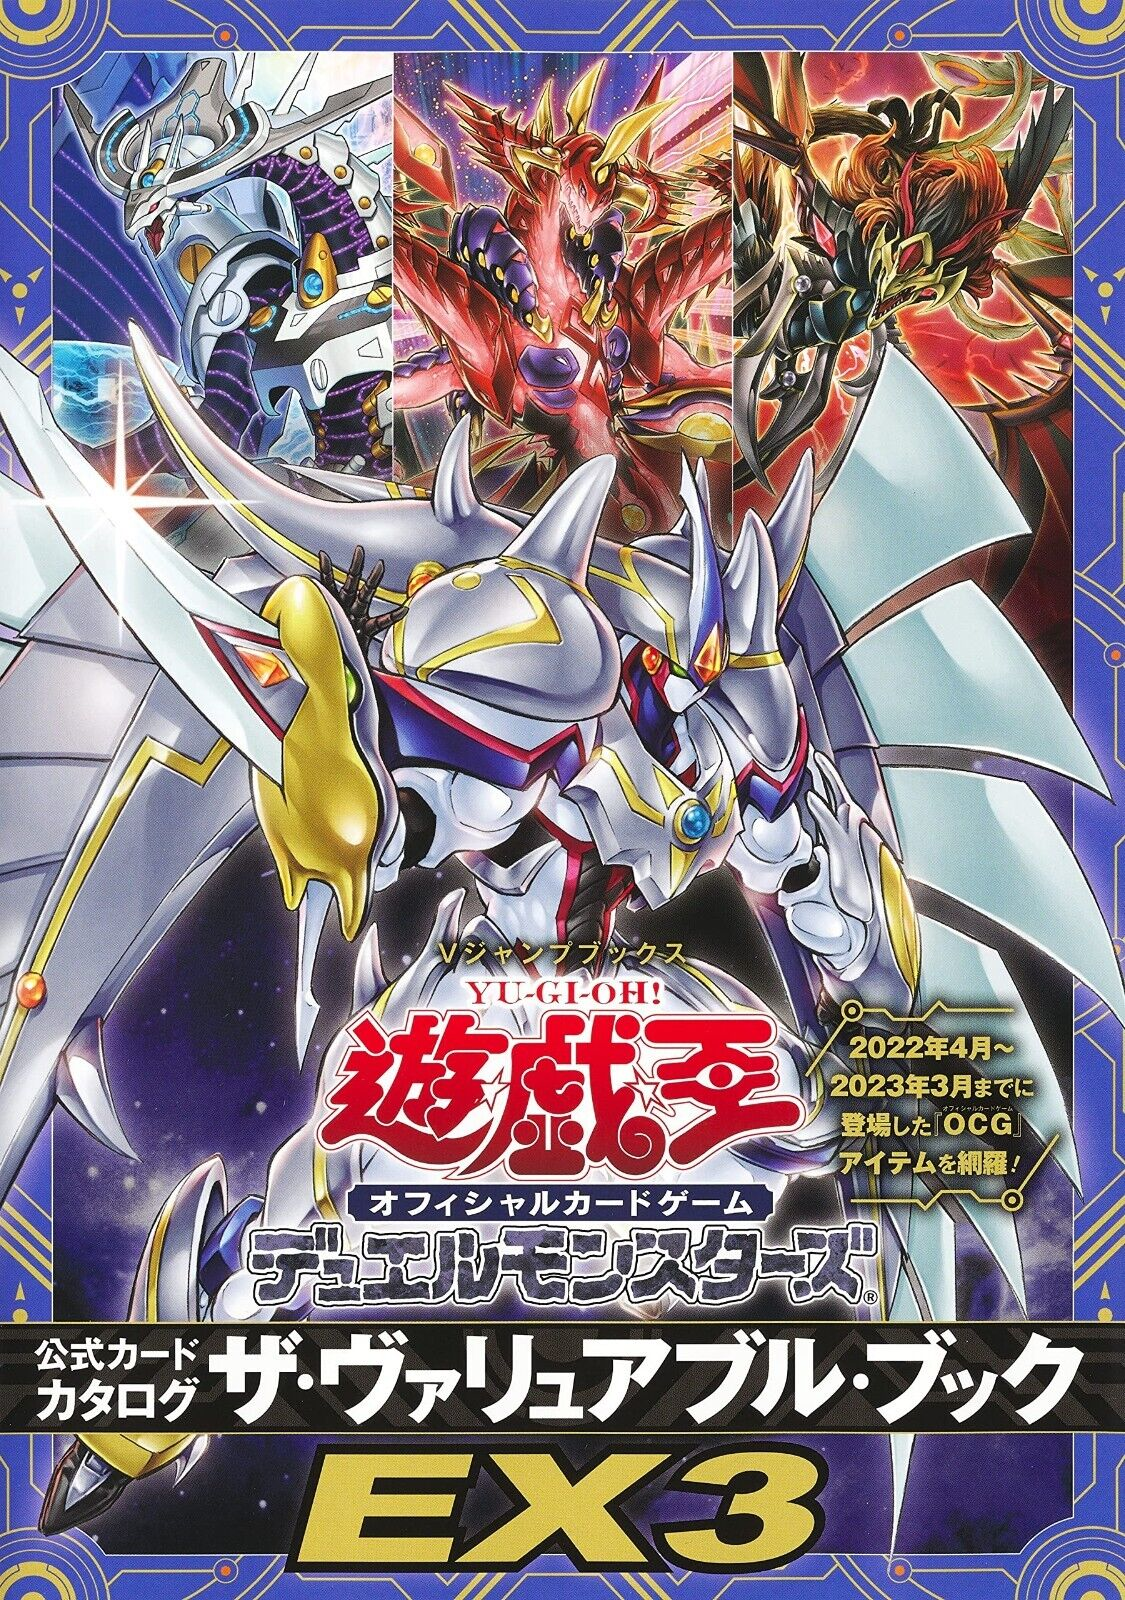 The Valuable Book EX 3 promotional cards | Yu-Gi-Oh! Wiki | Fandom